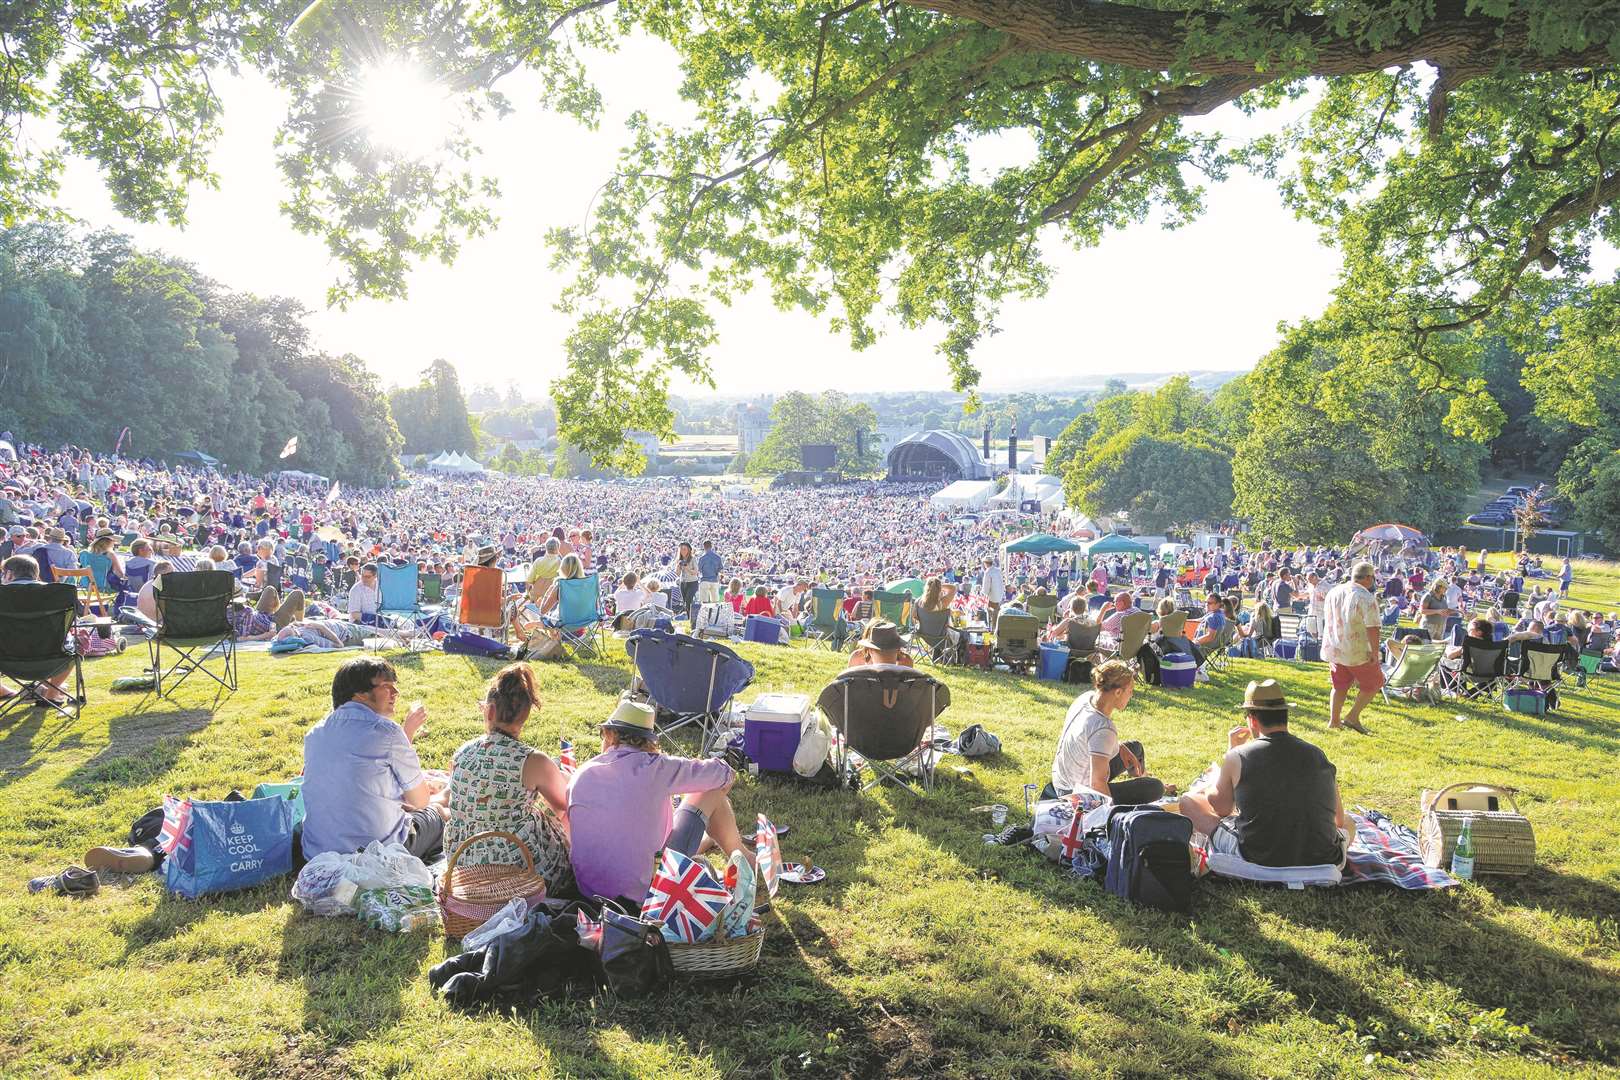 The crowds at Leeds Castle's open air classical concert